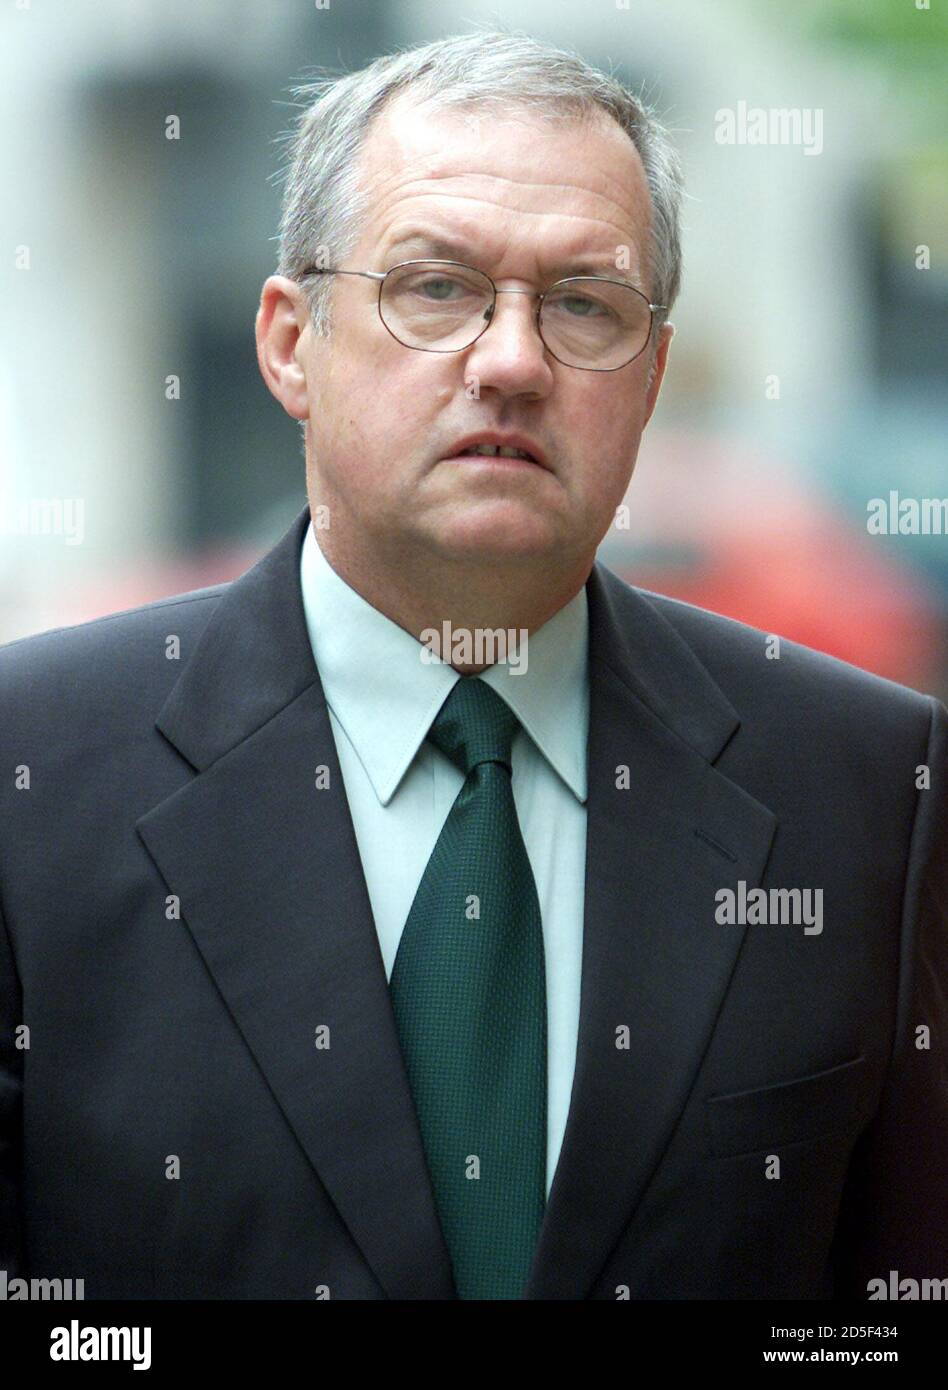 Former South Yorkshire Police Chief Superintendent David Duckinfield arrives at Leeds Crown Court June 12. Duckinfield and former Superintendent Bernard Murray are charged with manslaughter and wilful neglect of duty in the first criminal proceedings to follow the Hillsborough tragedy in which 96 Liverpool soccer fans were crushed to death at the 1989 FA Cup Semi final.  DC/PS Stock Photo